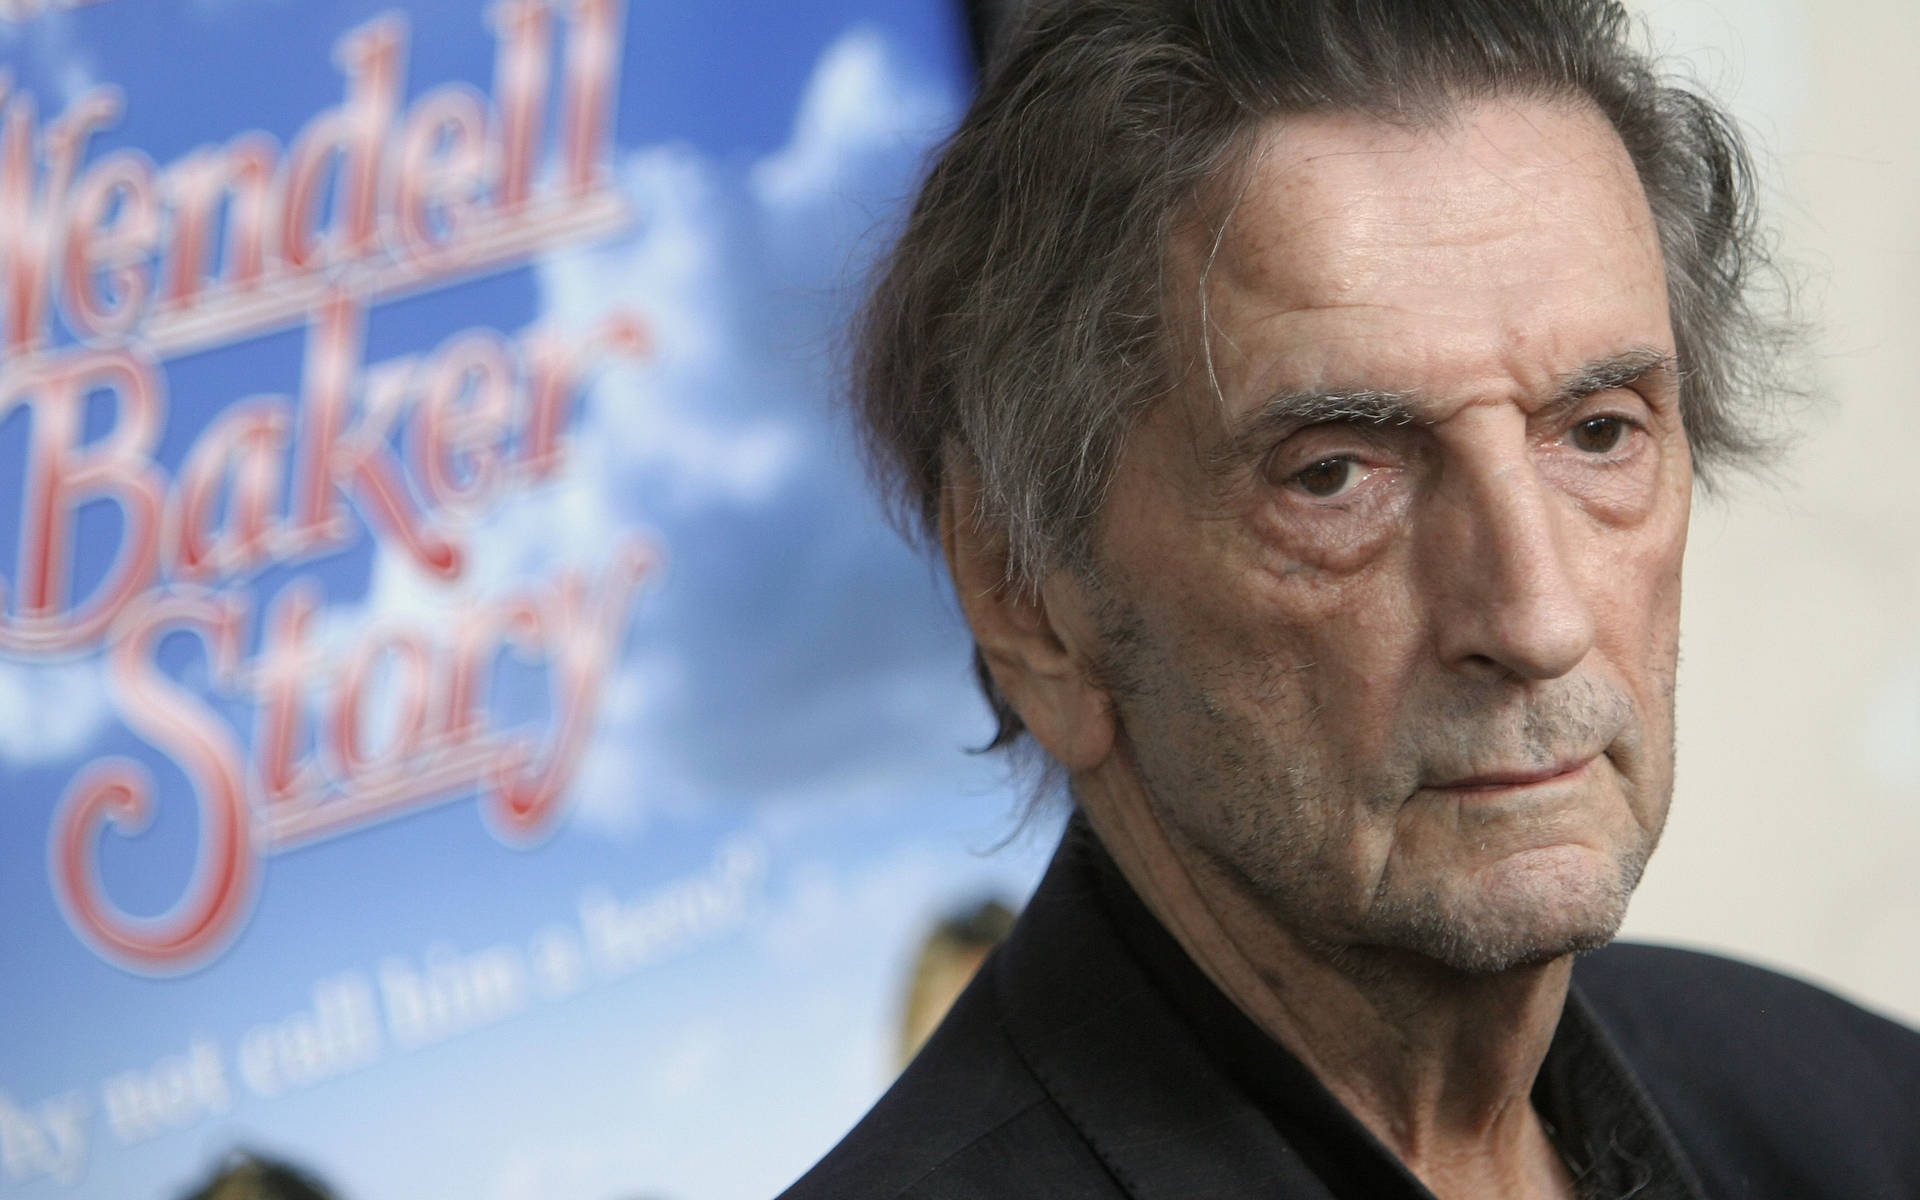 Harrydean Stanton Wendell Baker Story 2005 Is A Film About A Man Named Wendell Baker, Played By Harry Dean Stanton. The Film Was Released In 2005. Wallpaper